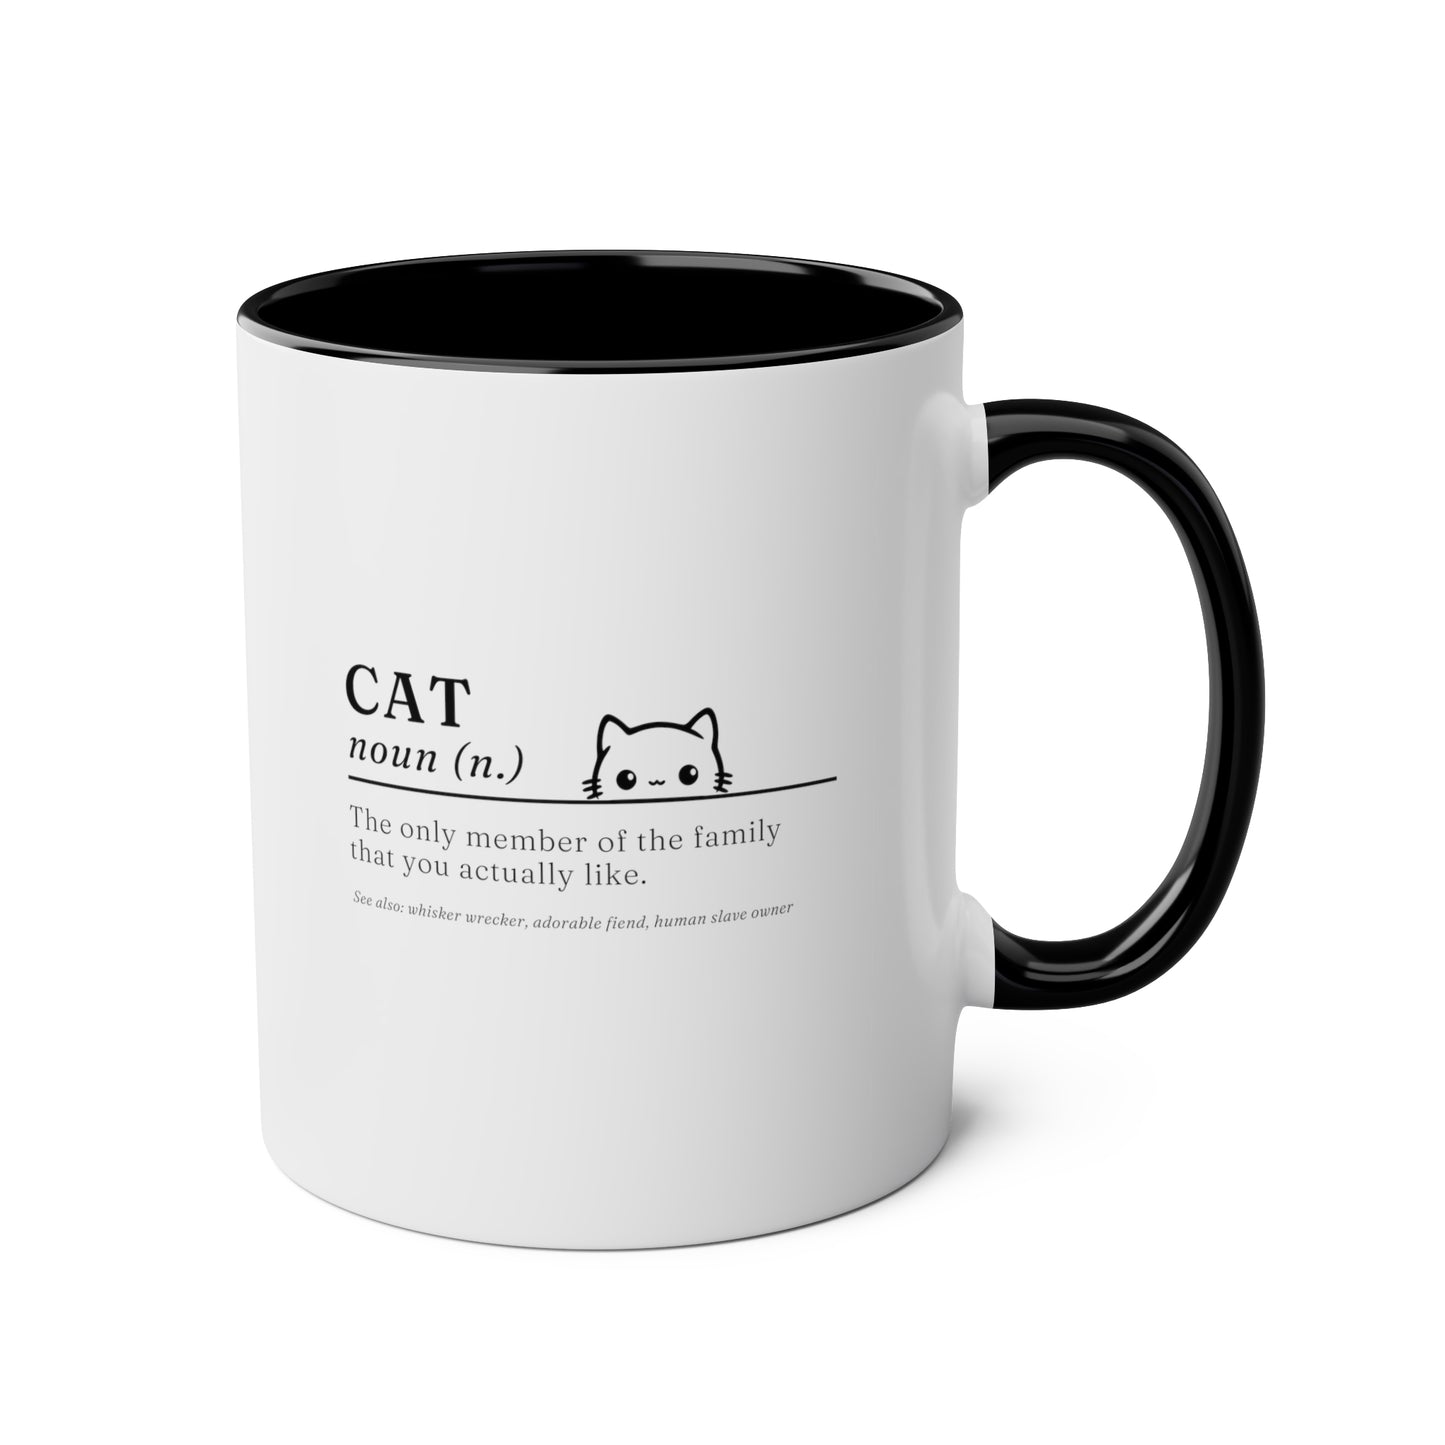 Pet Cat Definition 11oz white with black accent funny large coffee mug gift for cat lover feline her him housewarming meaning friend birthday waveywares wavey wares wavywares wavy wares